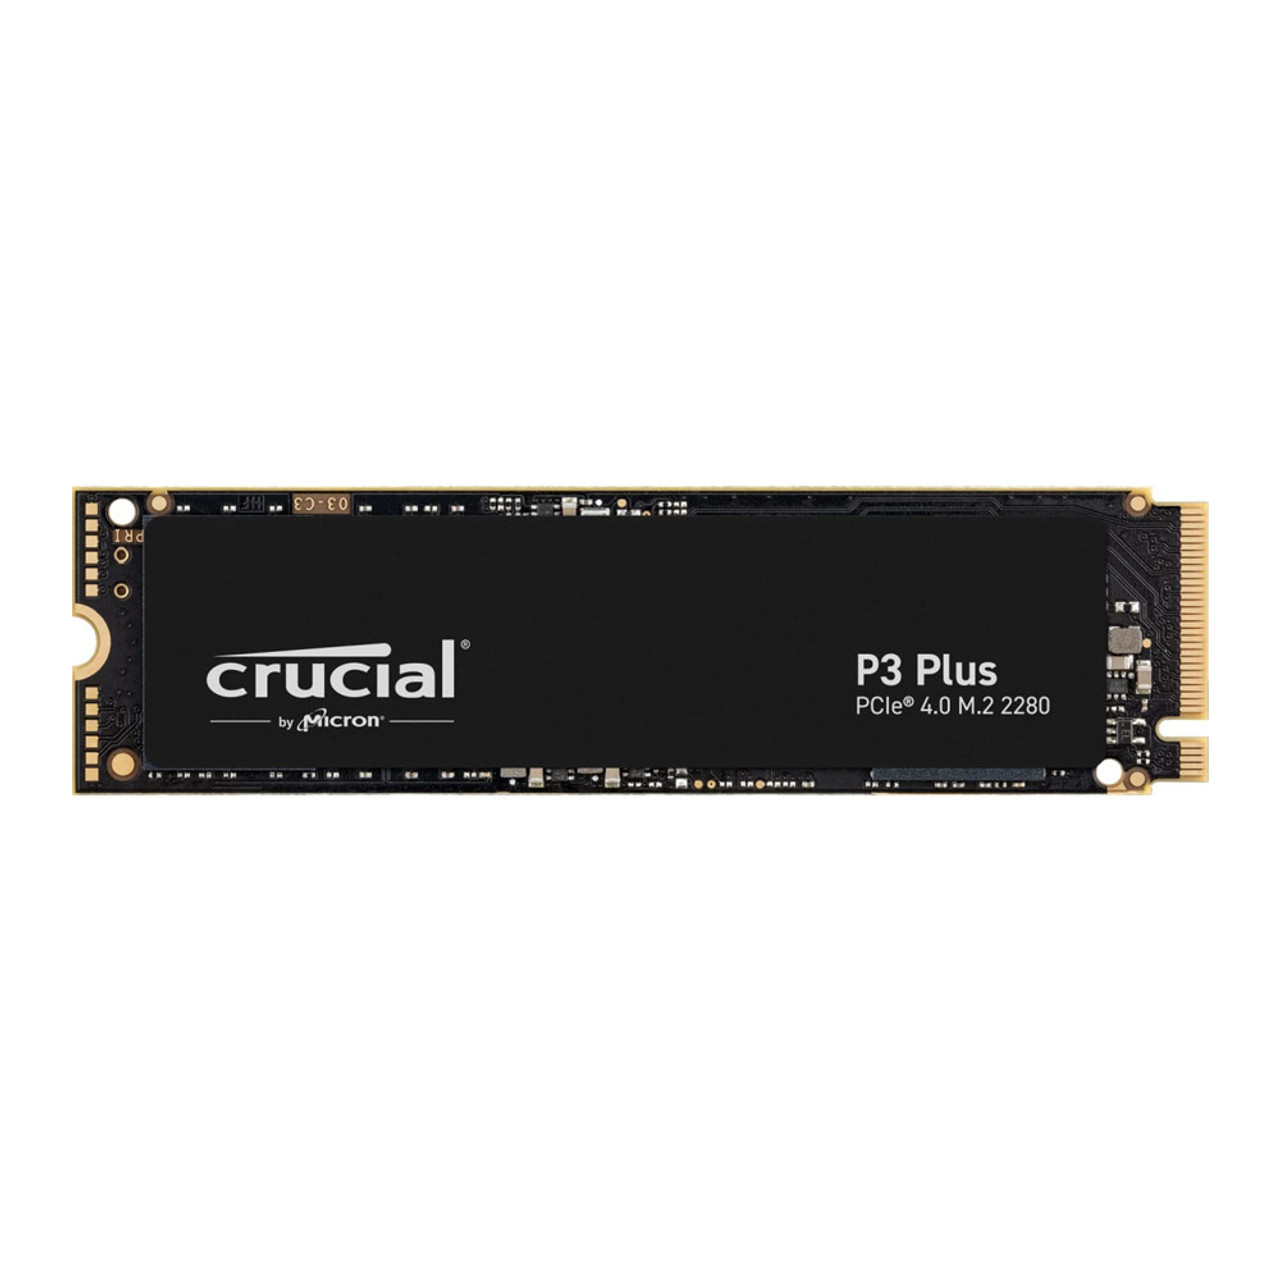 Crucial P3 Plus 4TB PCIe Gen4 3D NAND NVMe M.2 SSD, up to 5000MB/s -  CT4000P3PSSD8